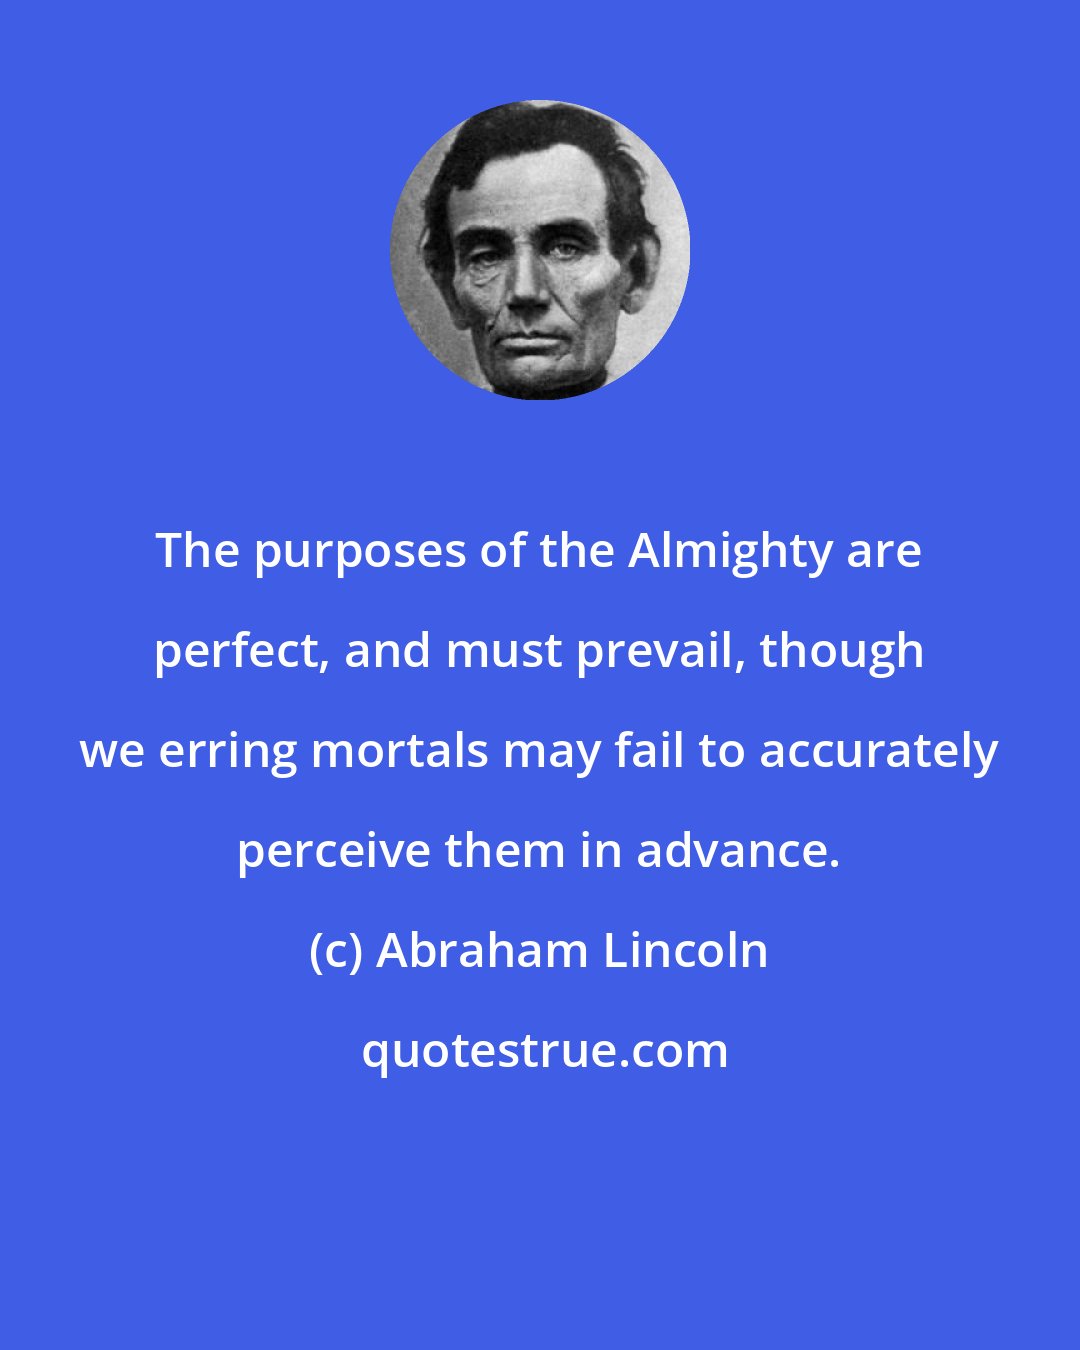 Abraham Lincoln: The purposes of the Almighty are perfect, and must prevail, though we erring mortals may fail to accurately perceive them in advance.